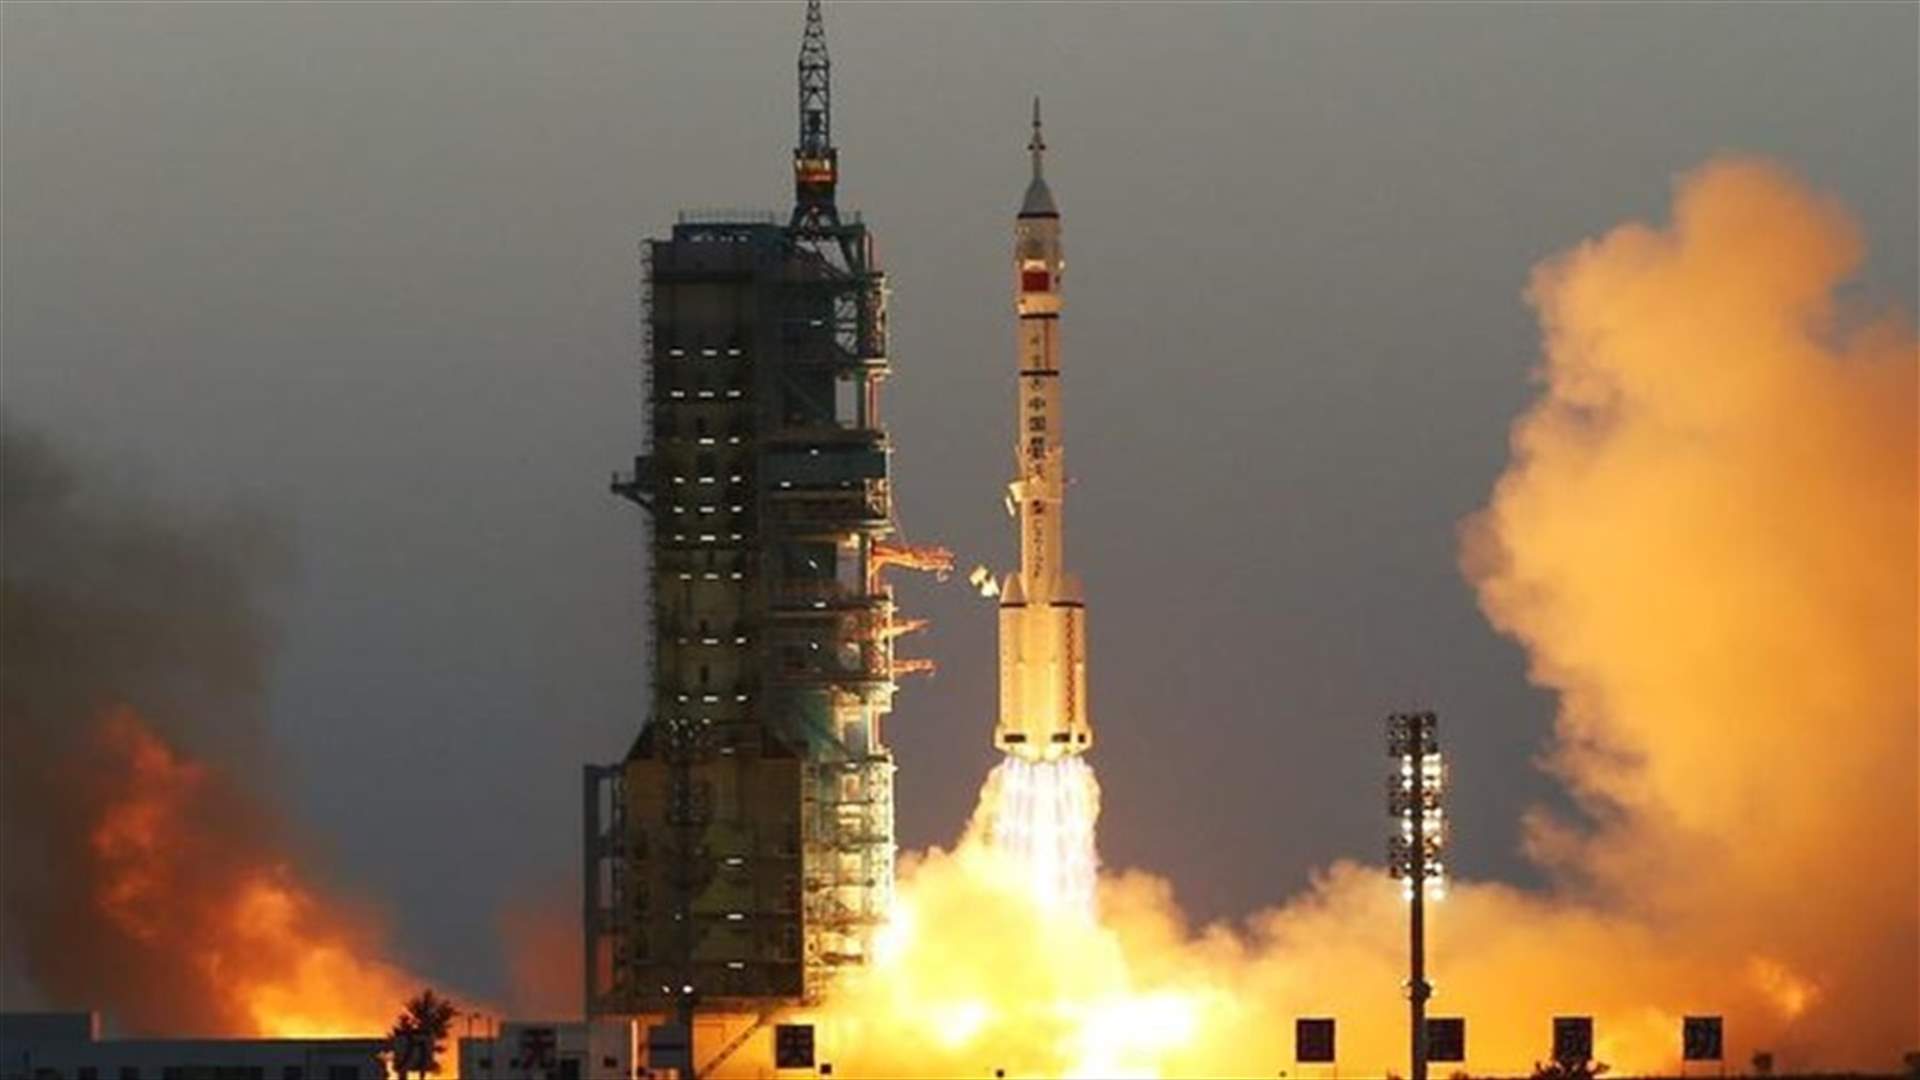 China Launches Its Longest Crewed Space Mission Yet